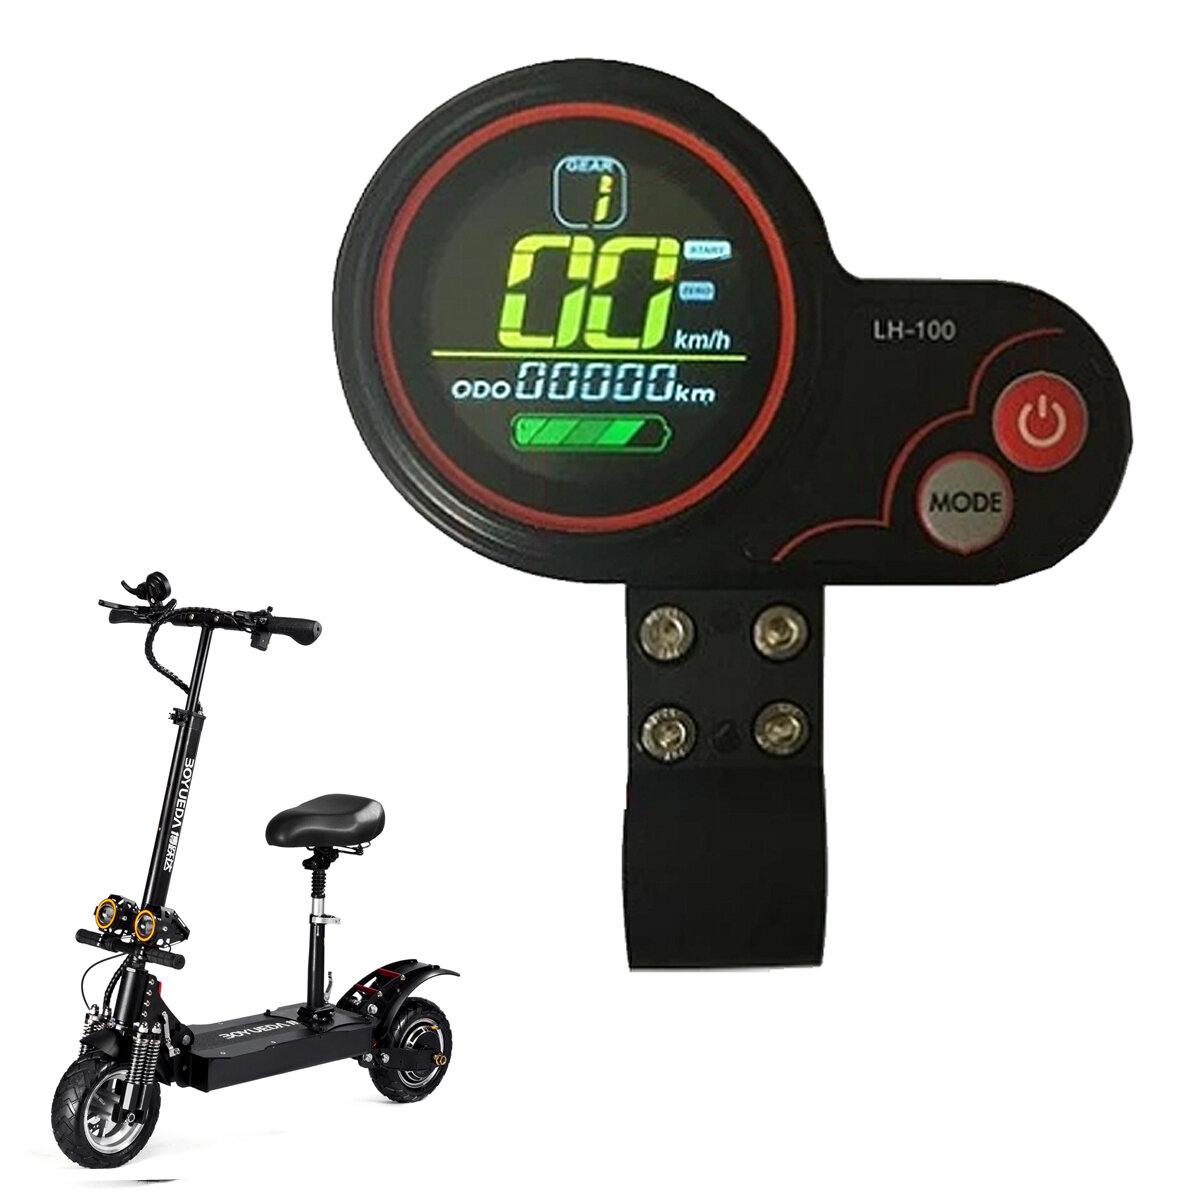 BOYUEDA Multi-function LCD Instrument Meter USB Rechargeable General Electric Scooter E-bike Safe and Intelligent Odometer